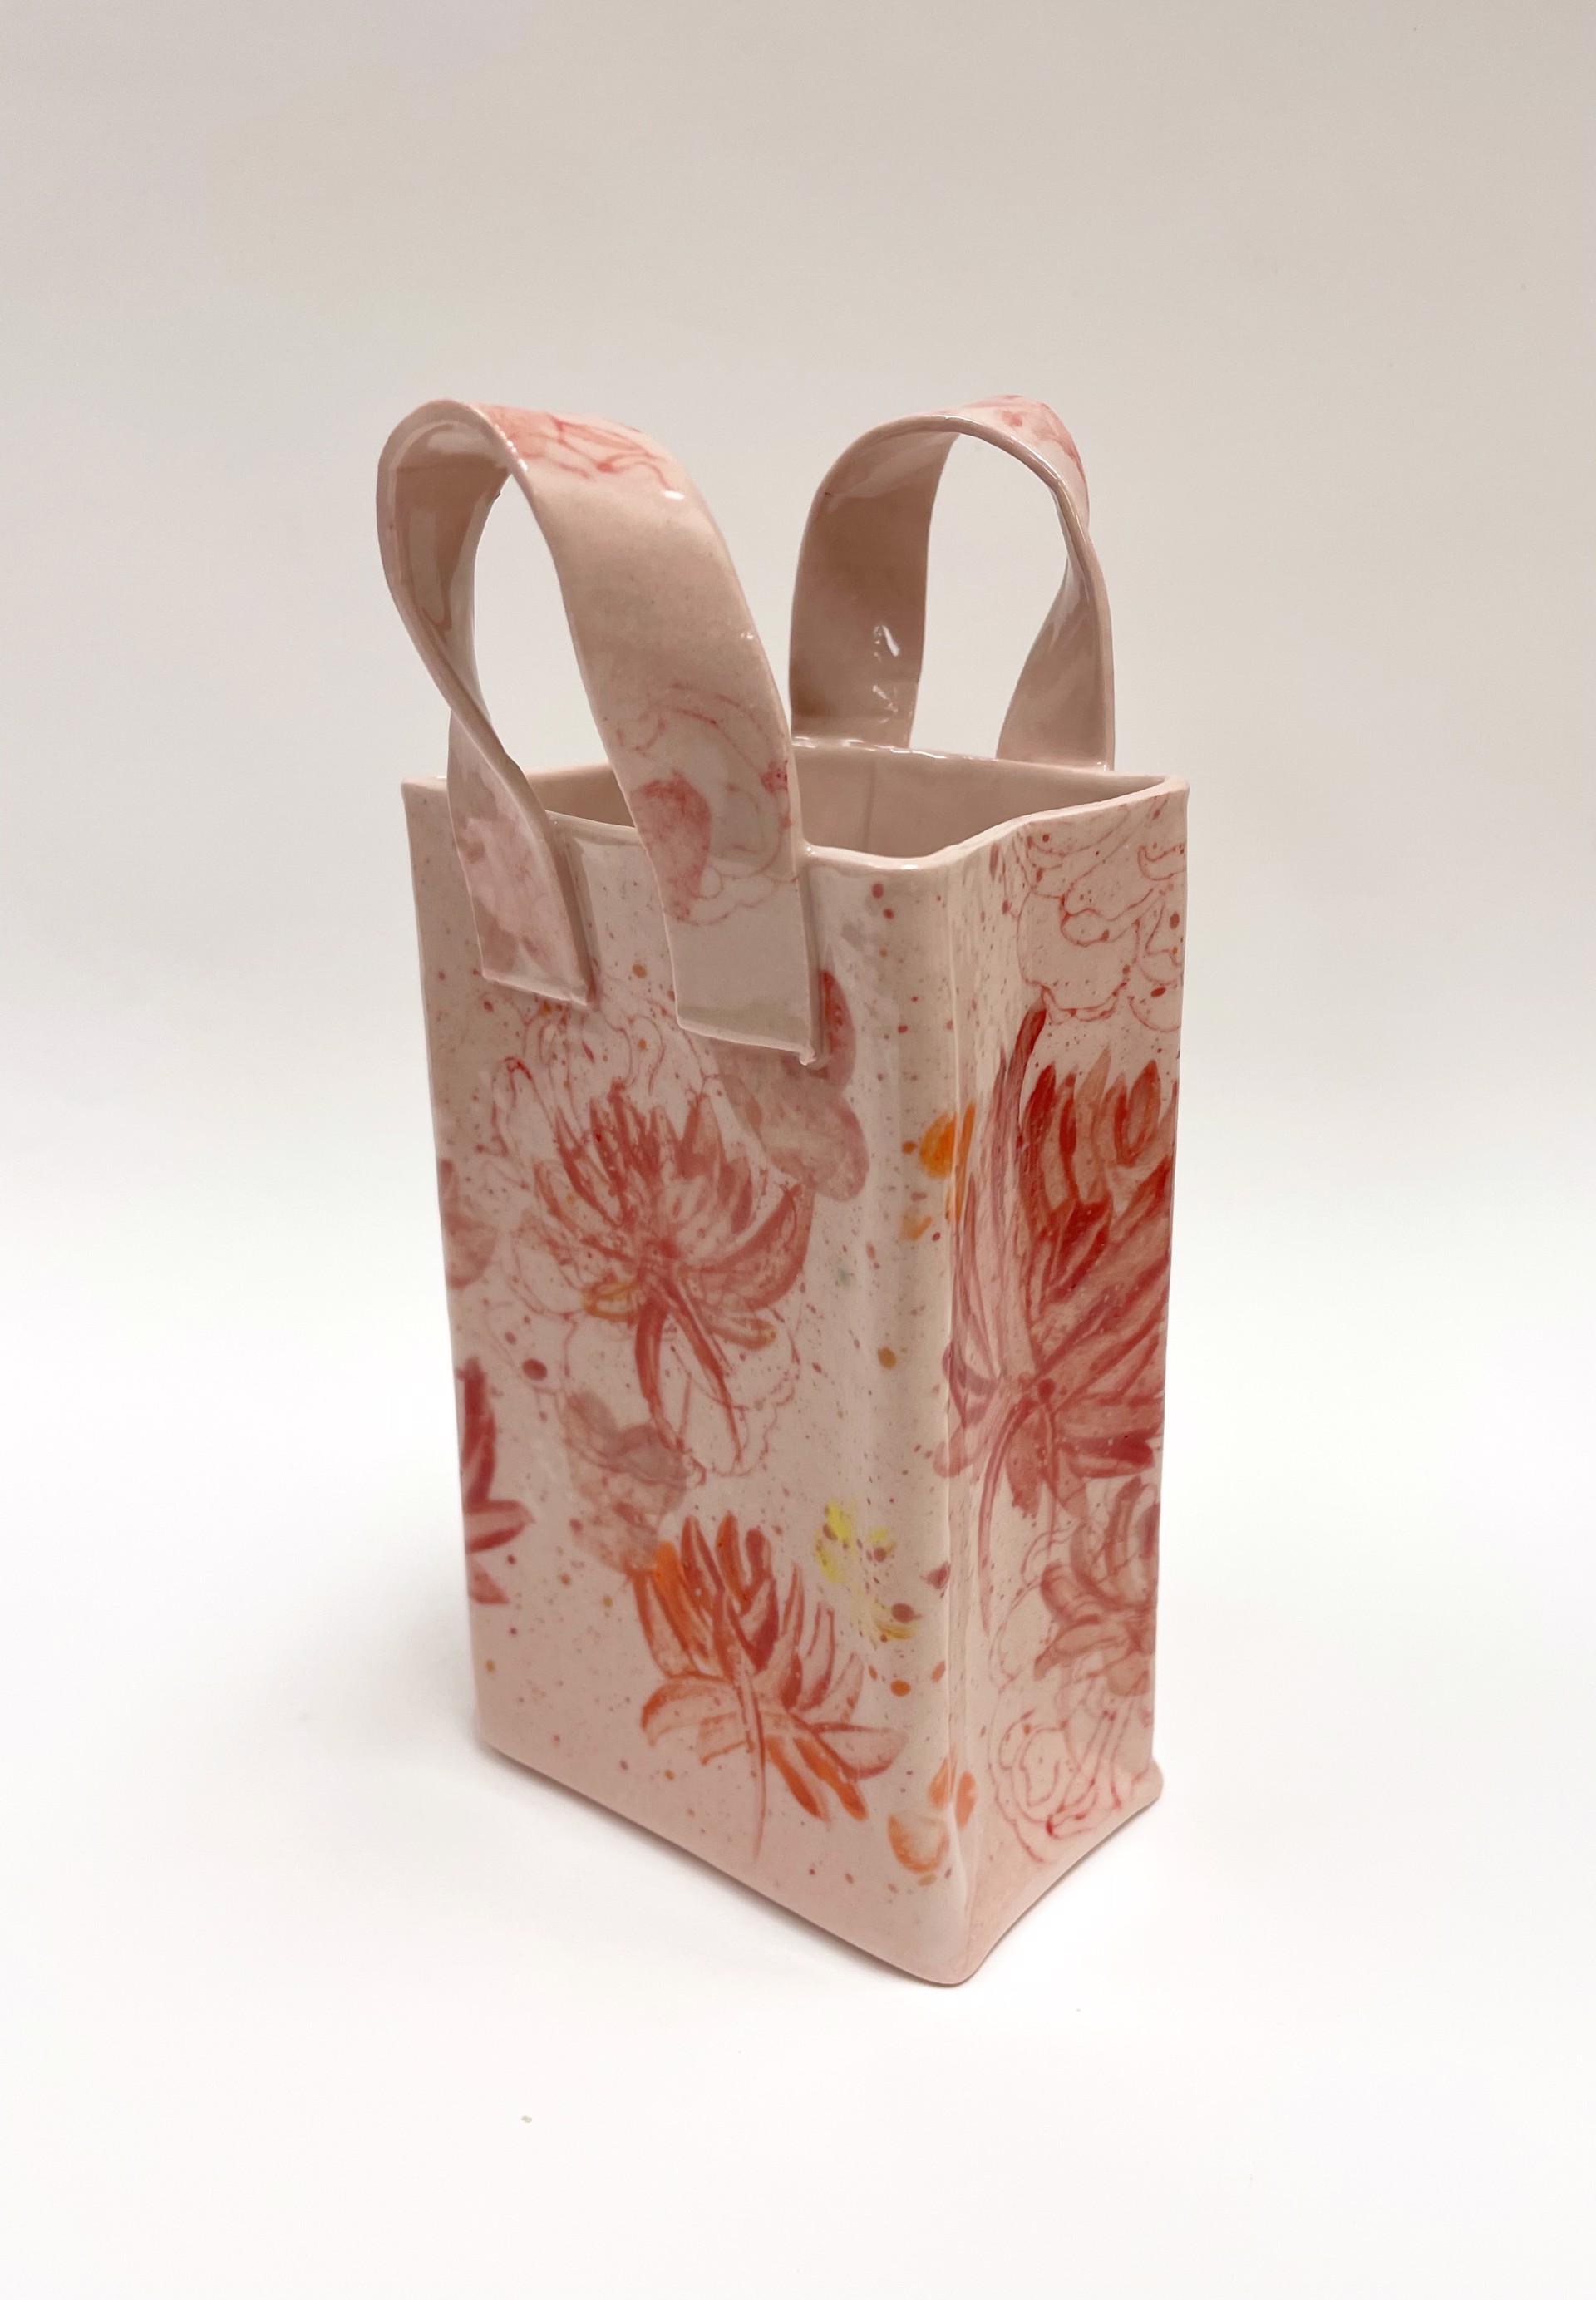 A Pink Bag with Red Flowers by Chandra Beadleston